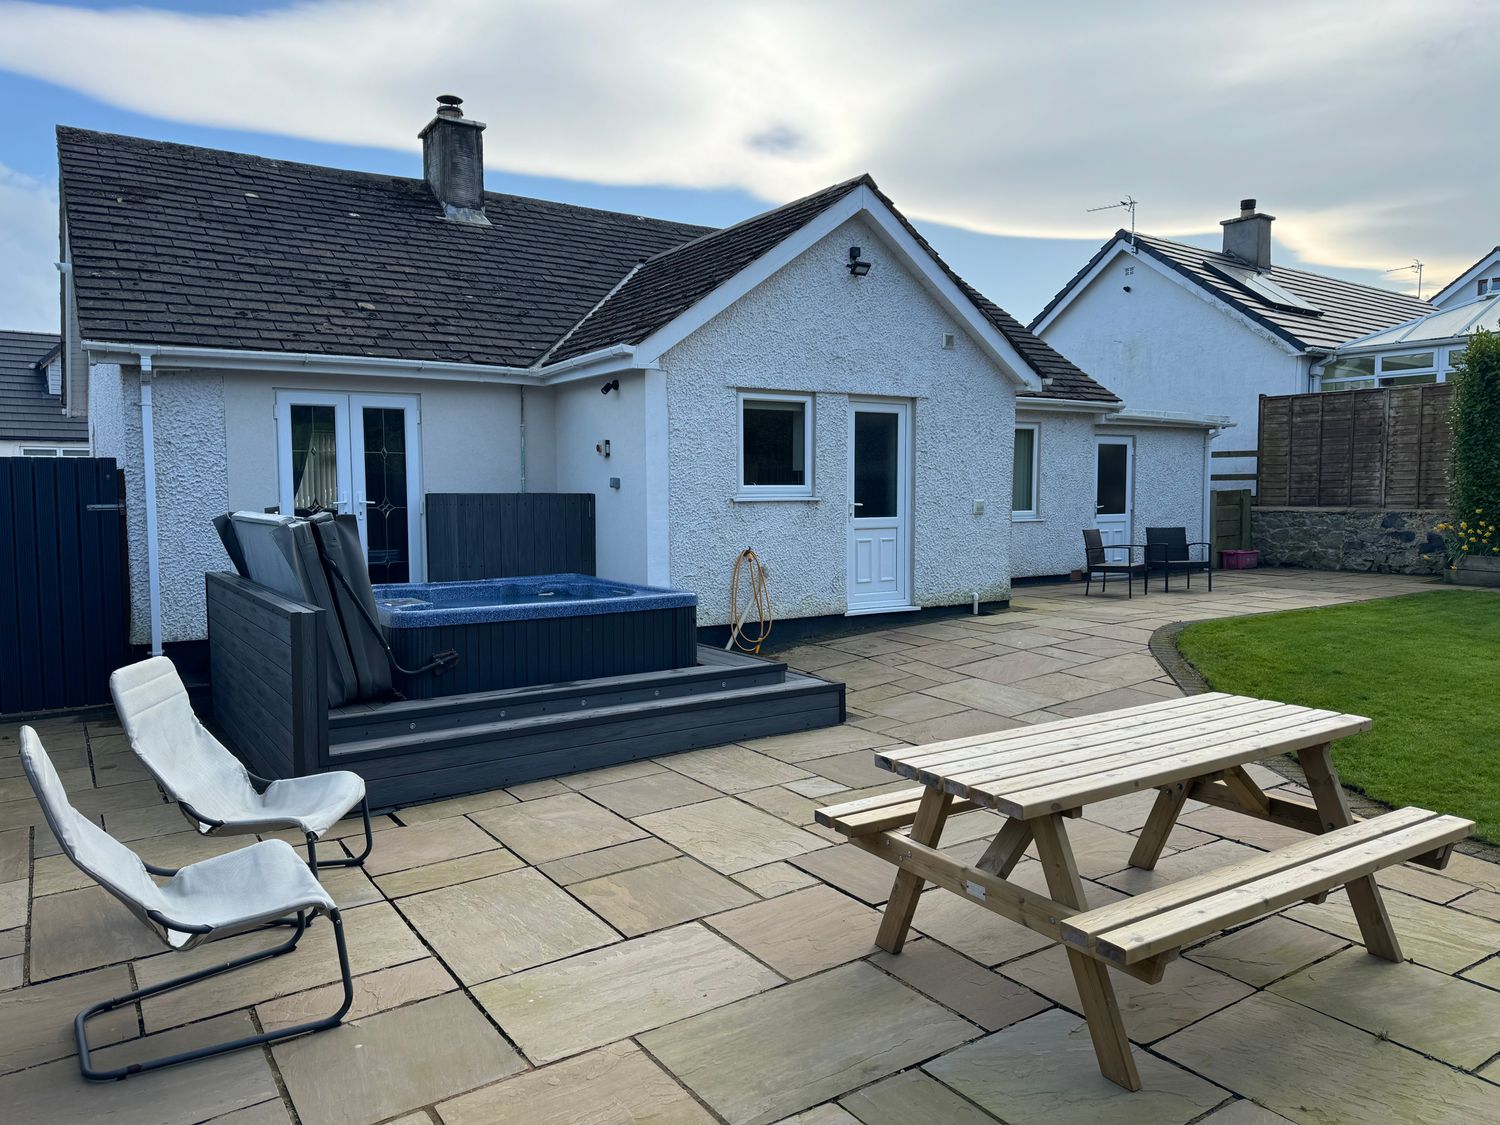 80 Breeze Hill, Benllech, Anglesey, pet-friendly hot tub, close to beach and amenities, contemporary